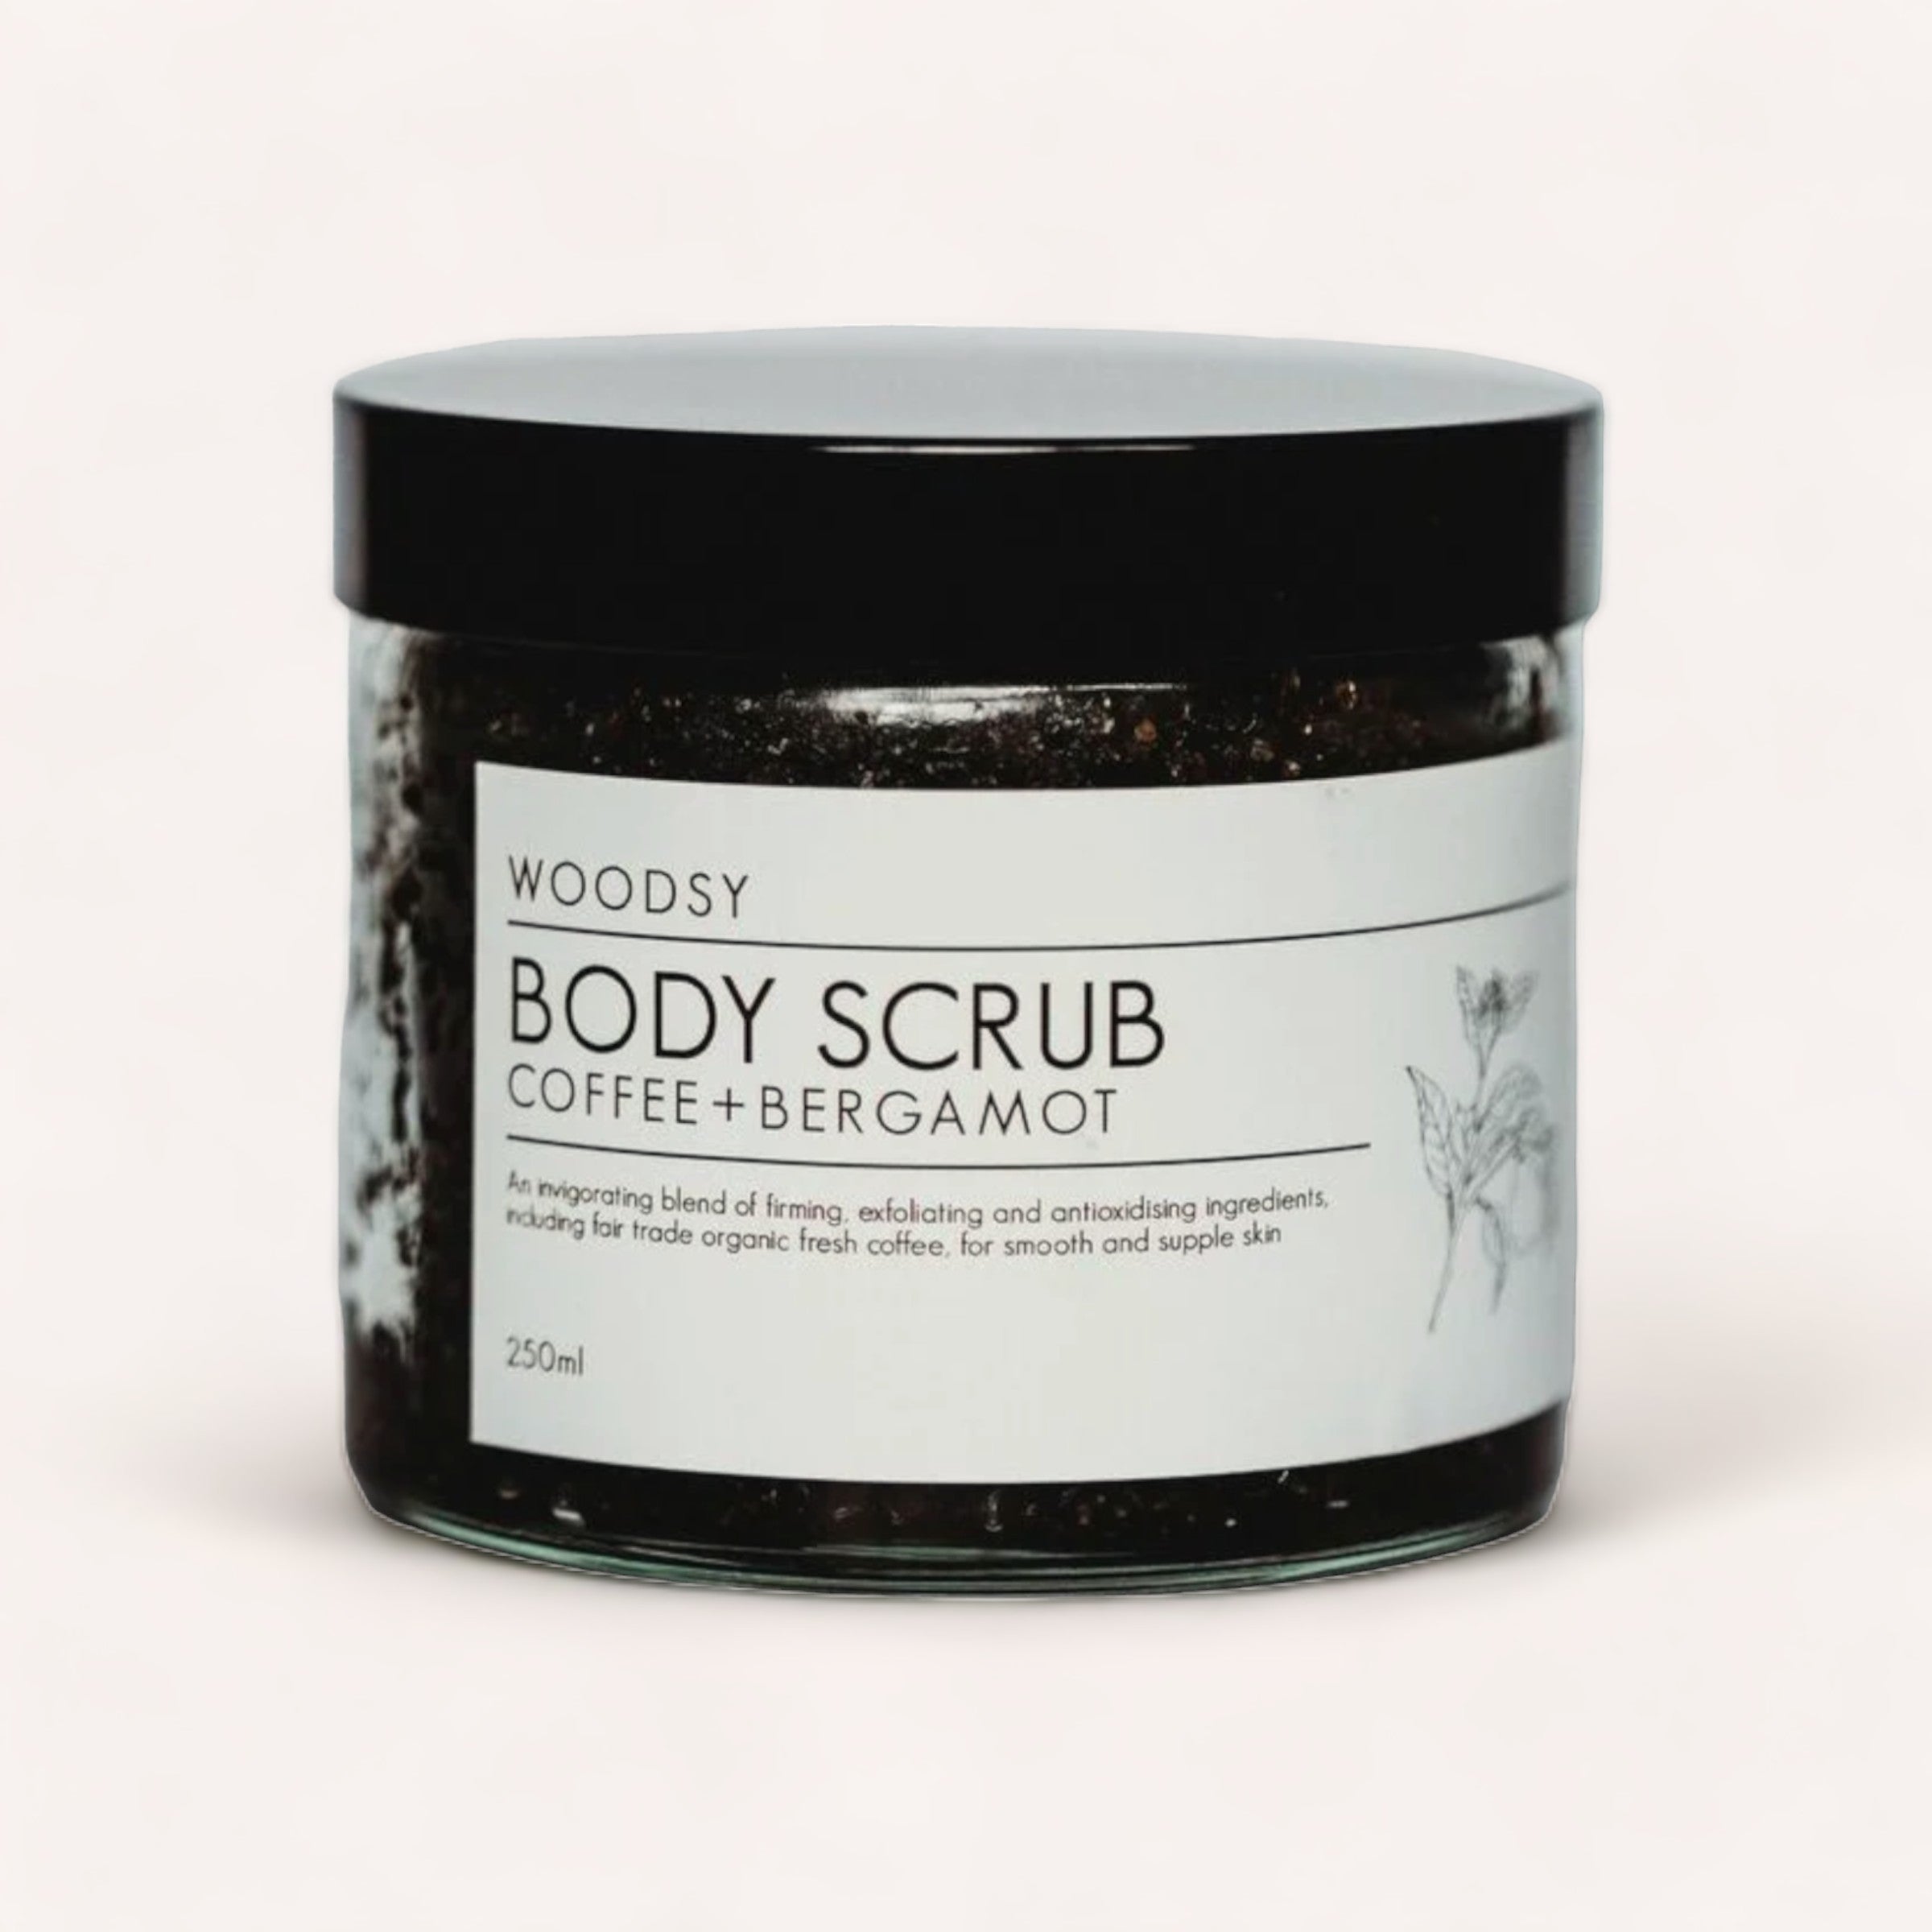 A jar of Woodsy Botanics Body Scrub - Coffee & Bergamot against a plain white background, highlighting its label and contents visibly through the clear section.